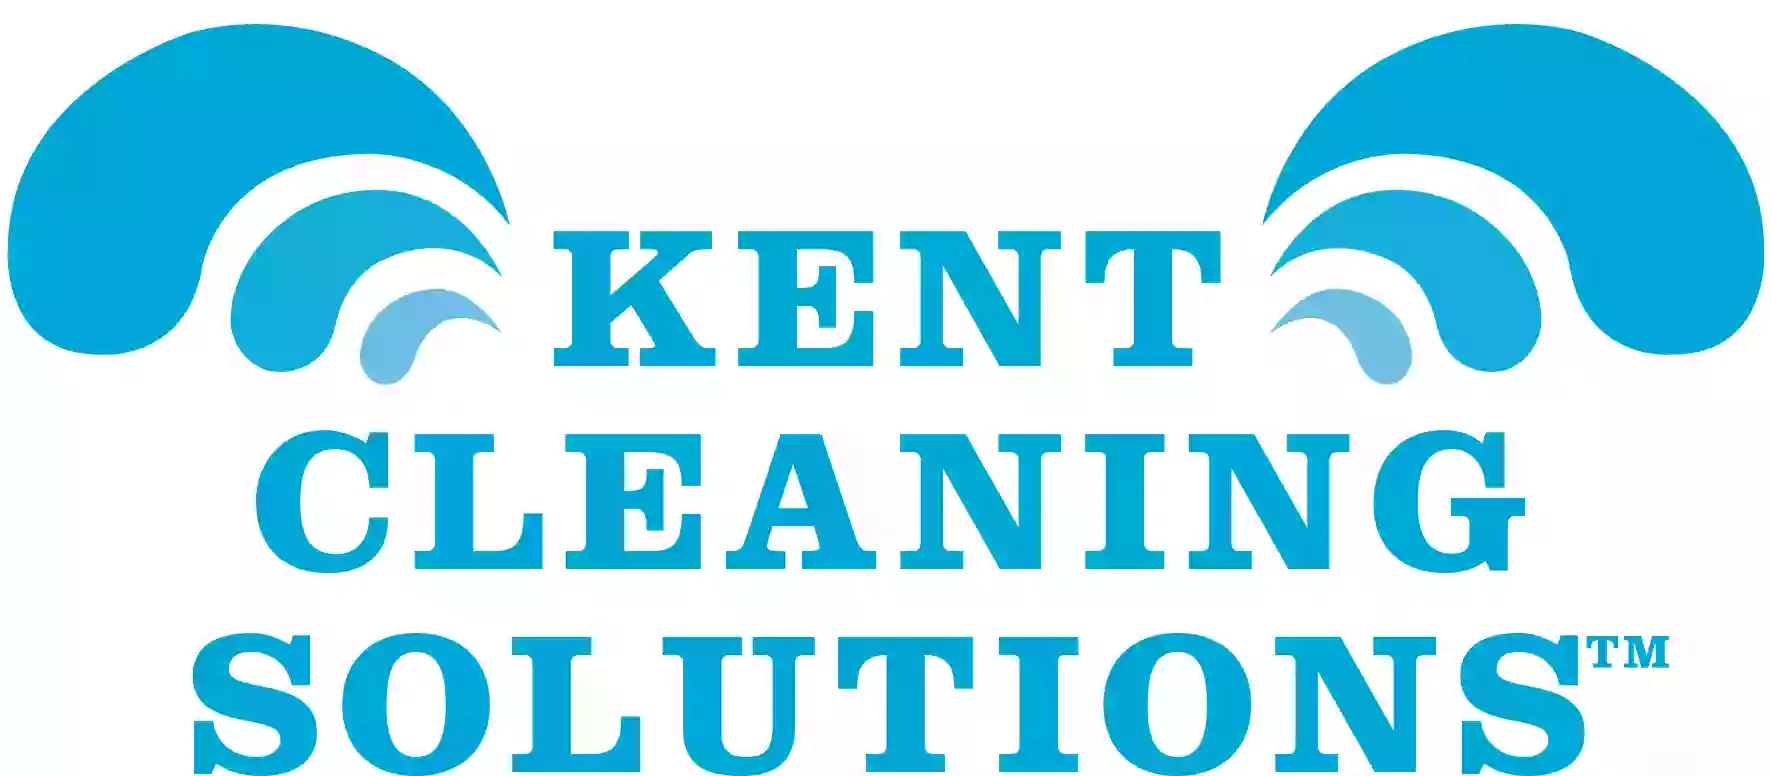 Kent Cleaning Solutions Ltd